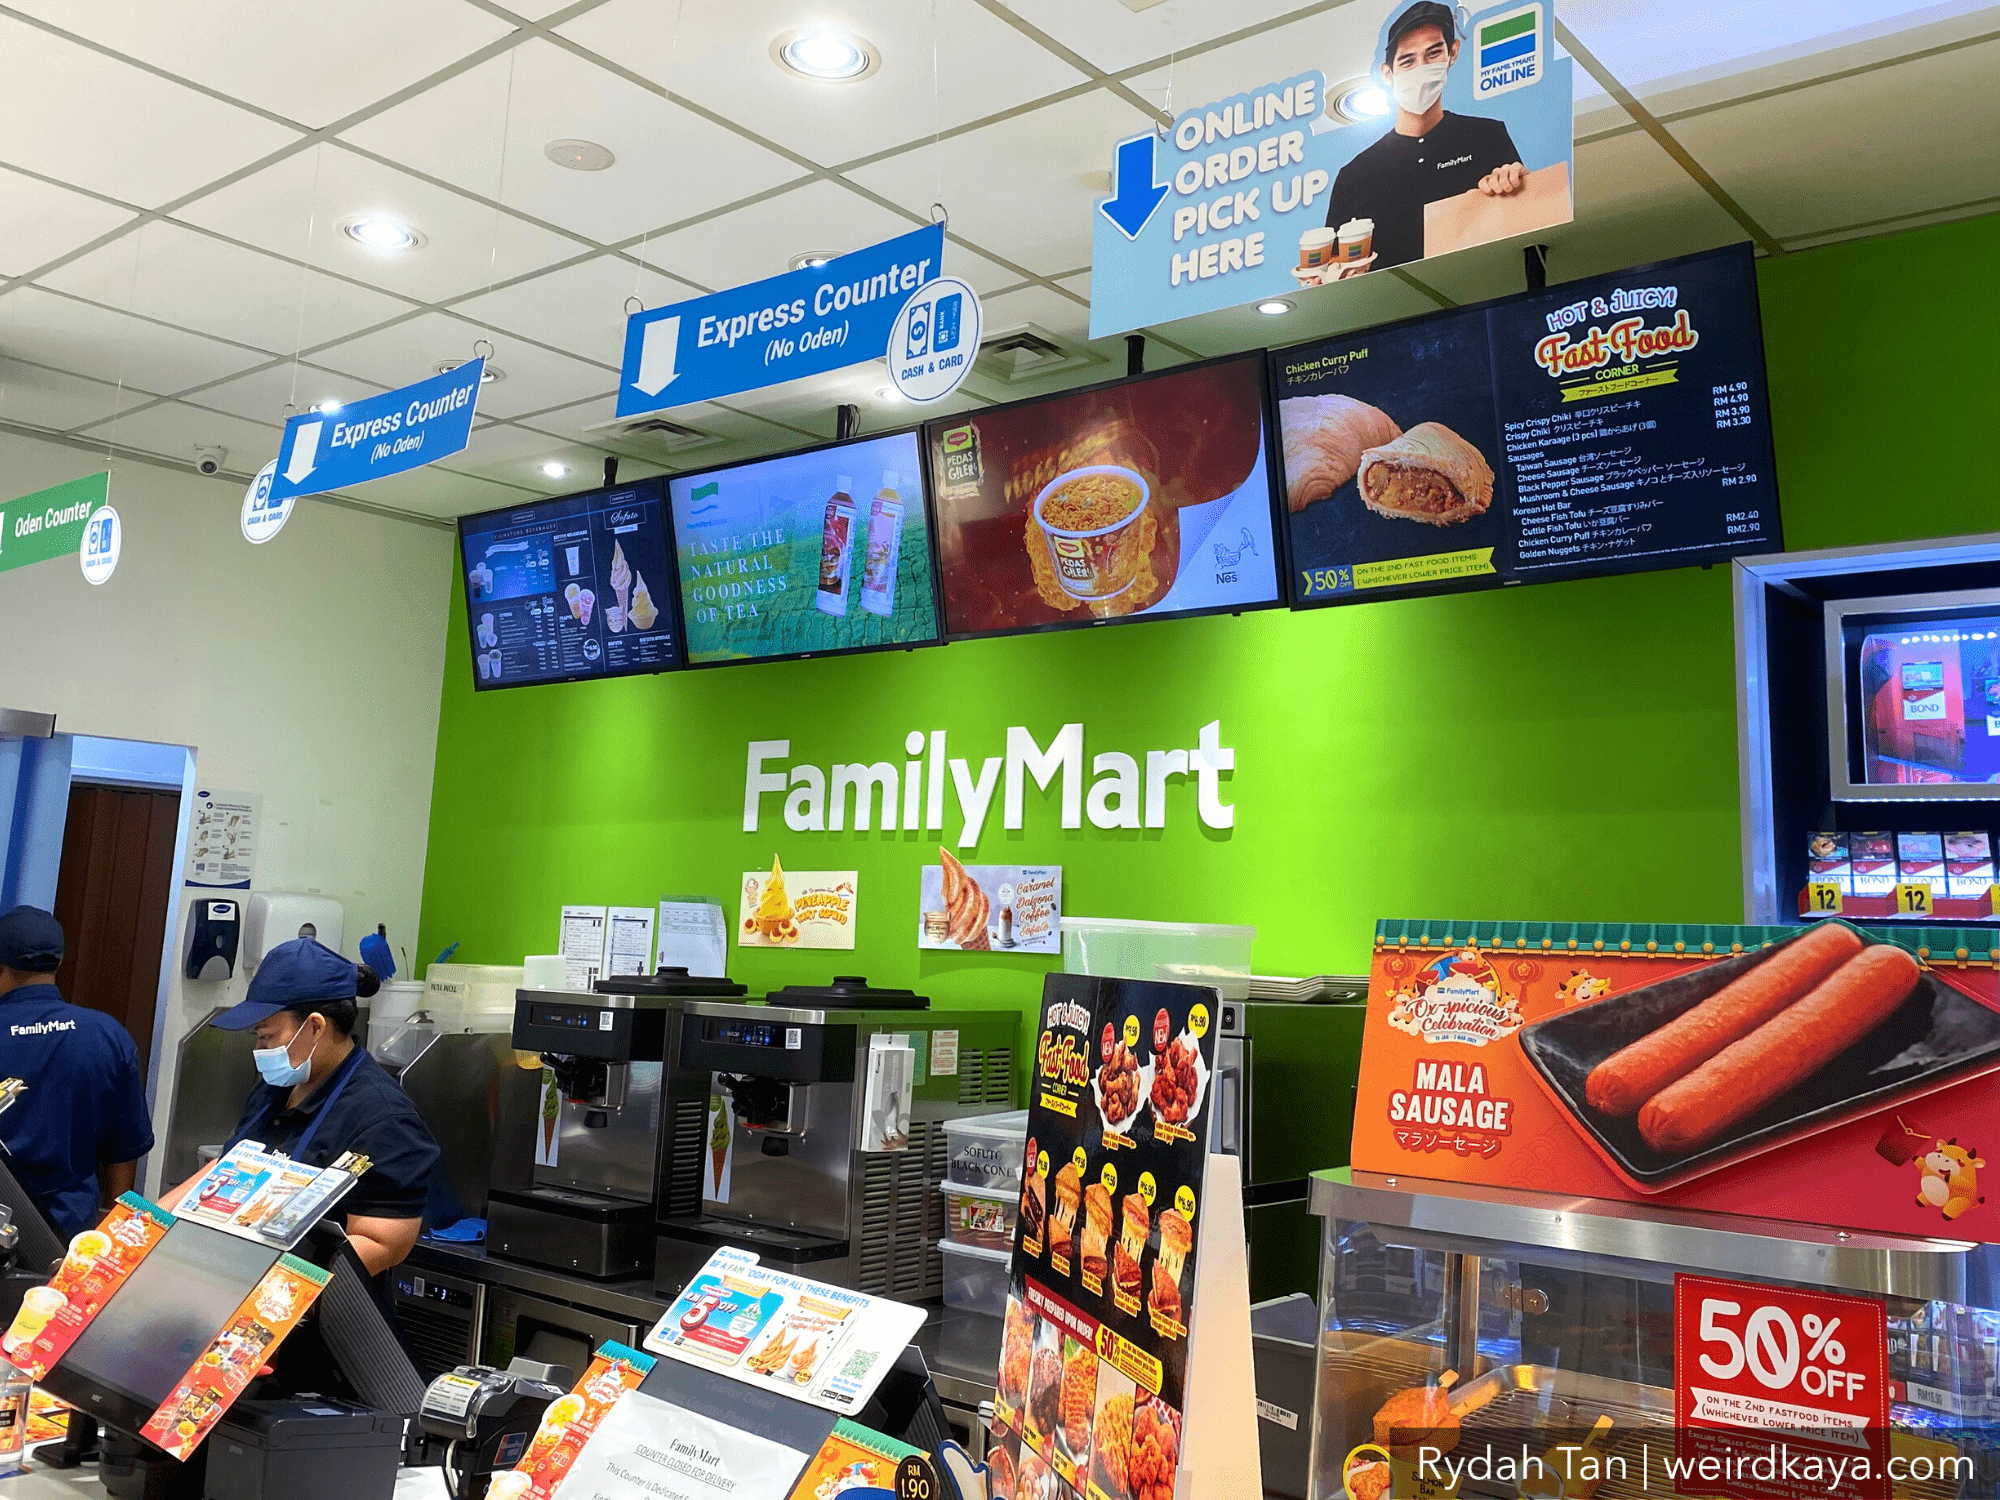 A cashier doing her job at a family mart store